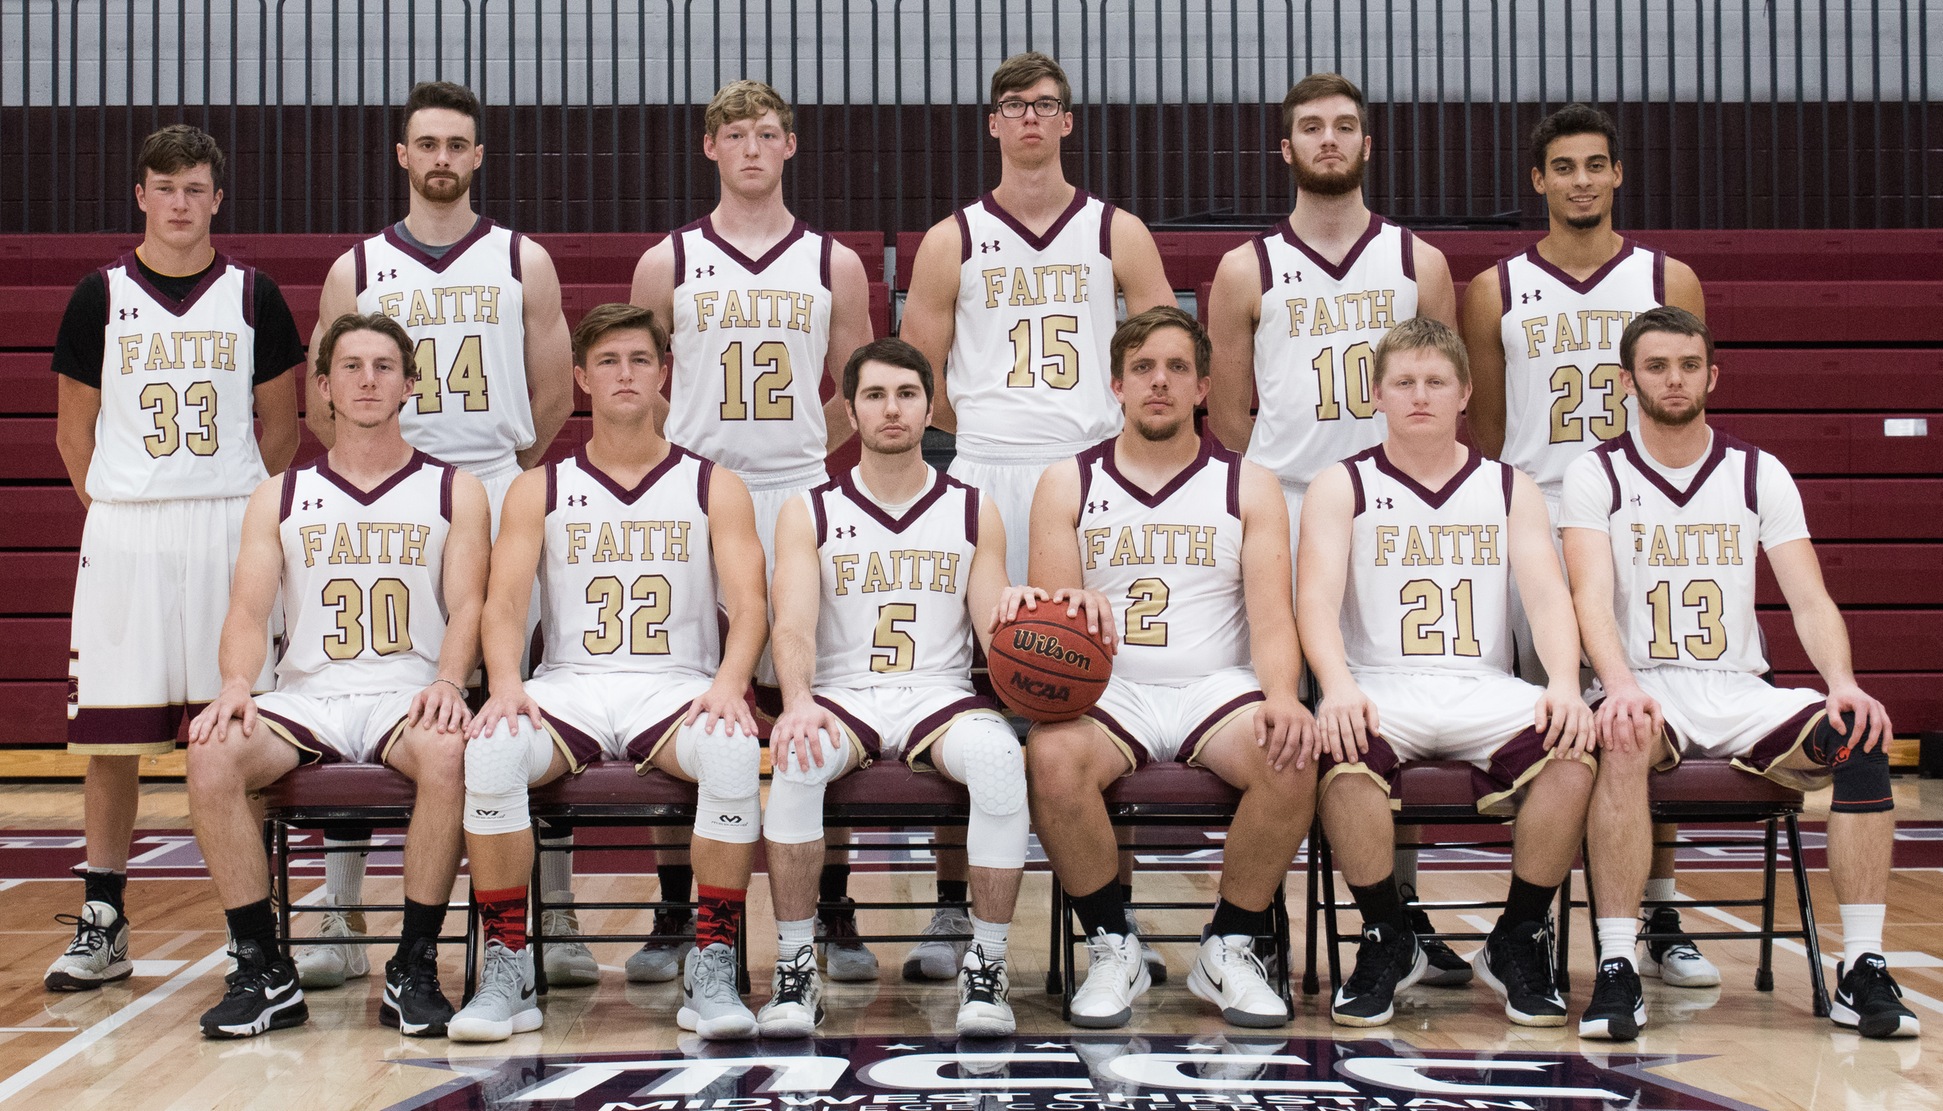 Men’s Basketball Preview: Eagles Look to Build on Last Season's Success